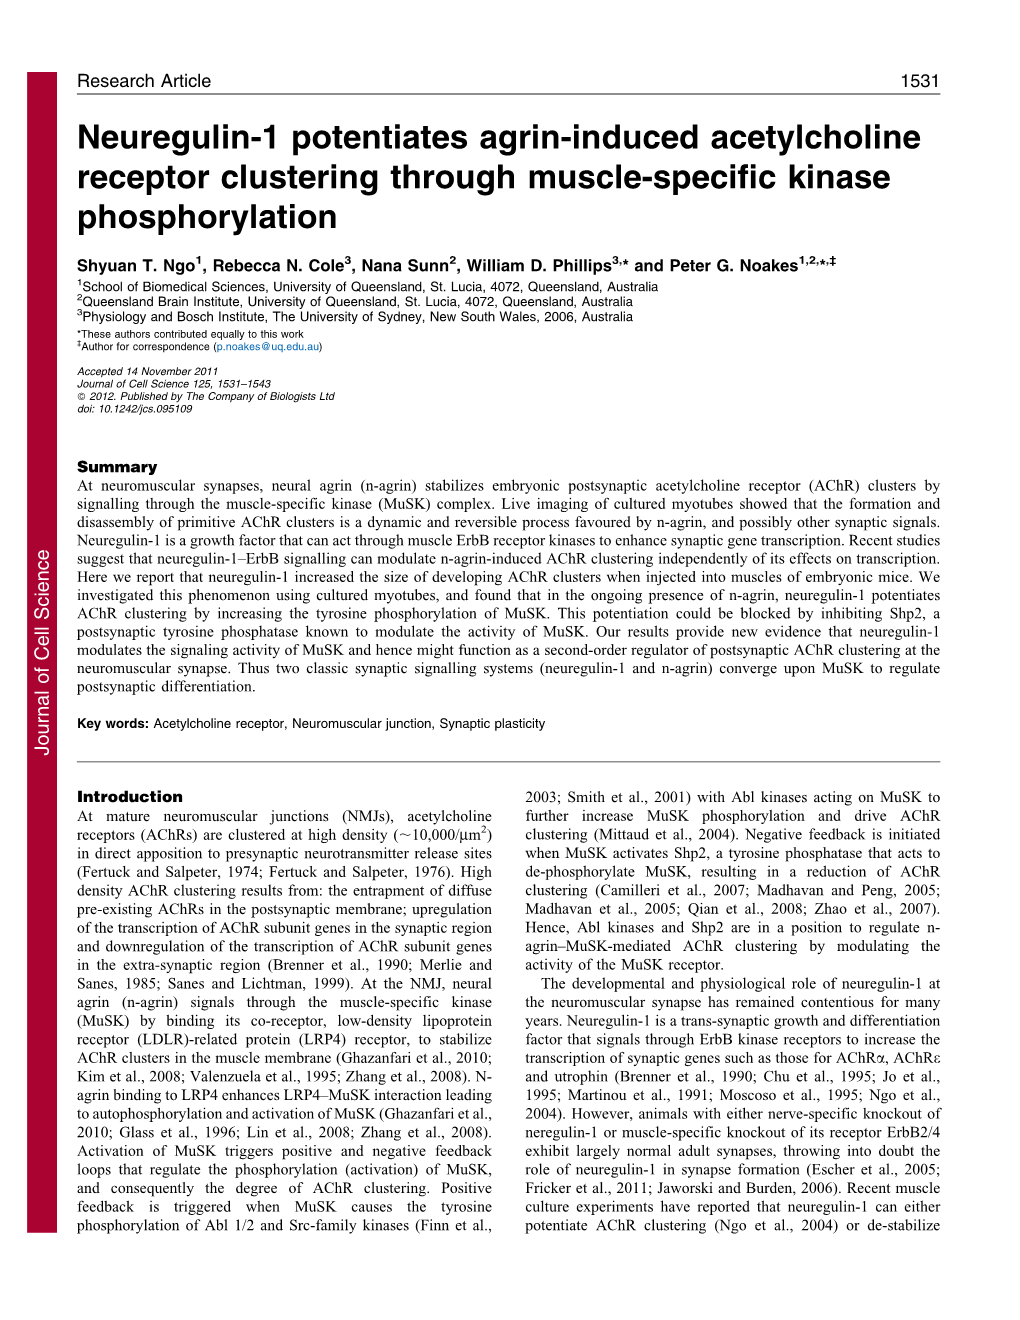 Neuregulin-1 Potentiates Agrin-Induced Acetylcholine Receptor Clustering Through Muscle-Specific Kinase Phosphorylation